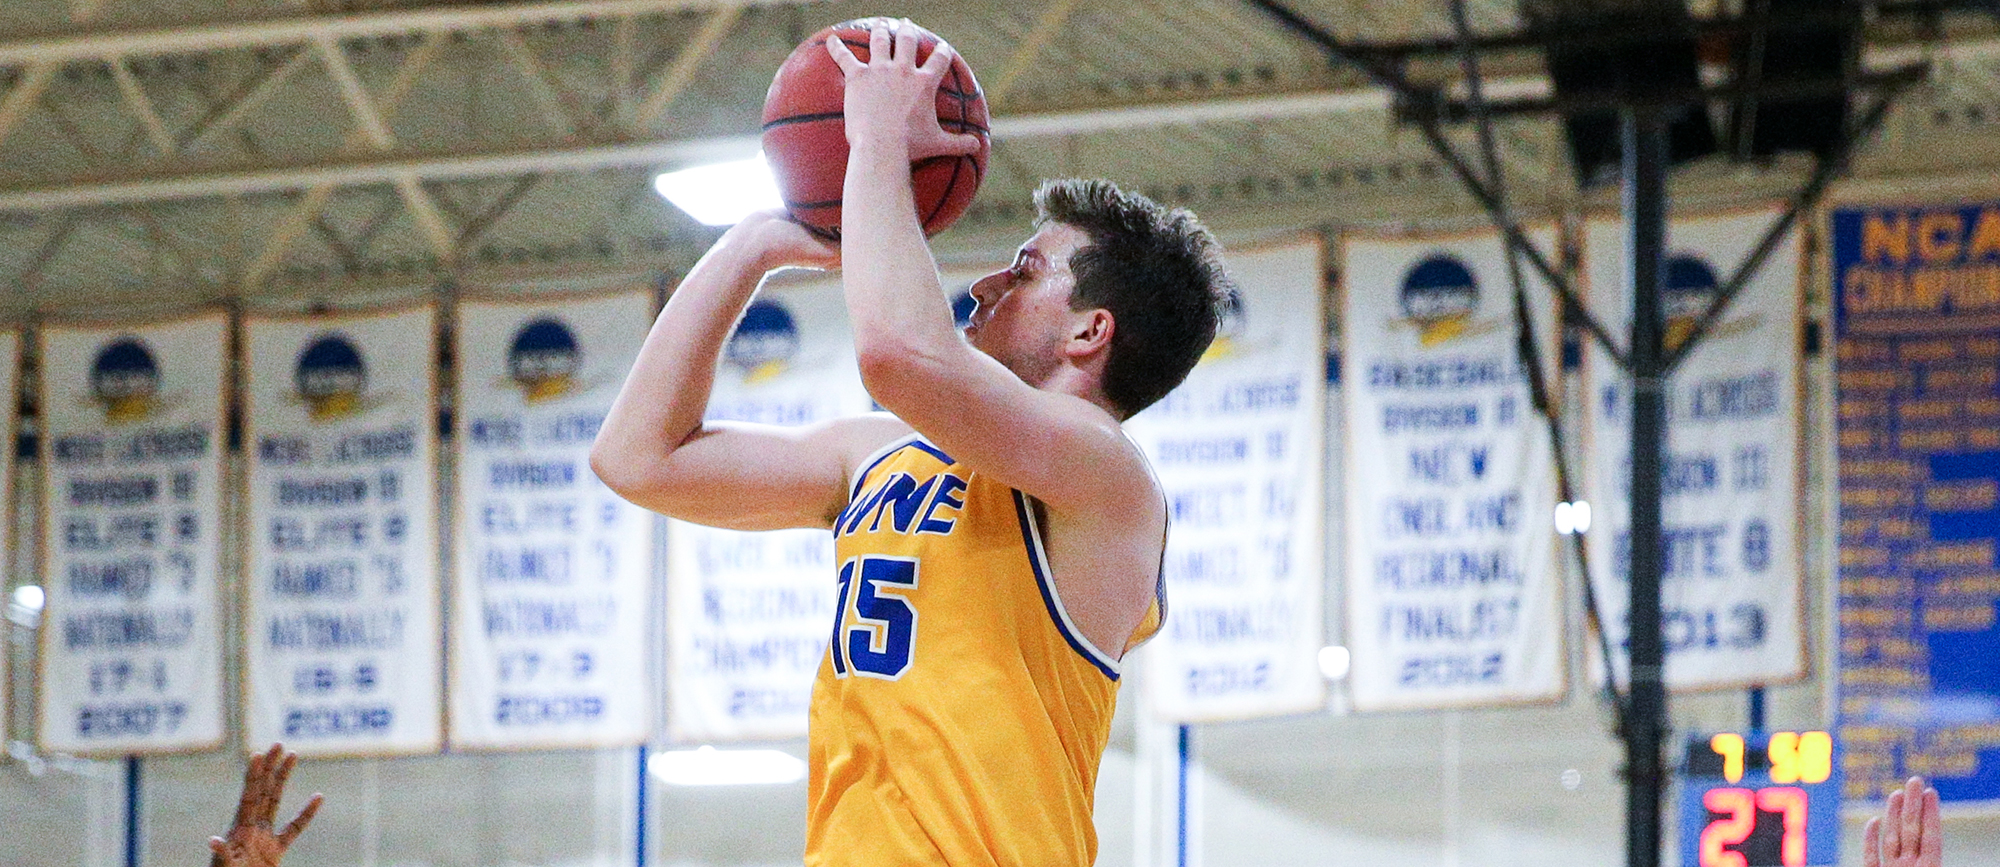 Sophomore Cole Eiber matched his career-high with 13 points in Western New England's 78-60 win at Curry on Thursday. (Photo by Chris Marion)